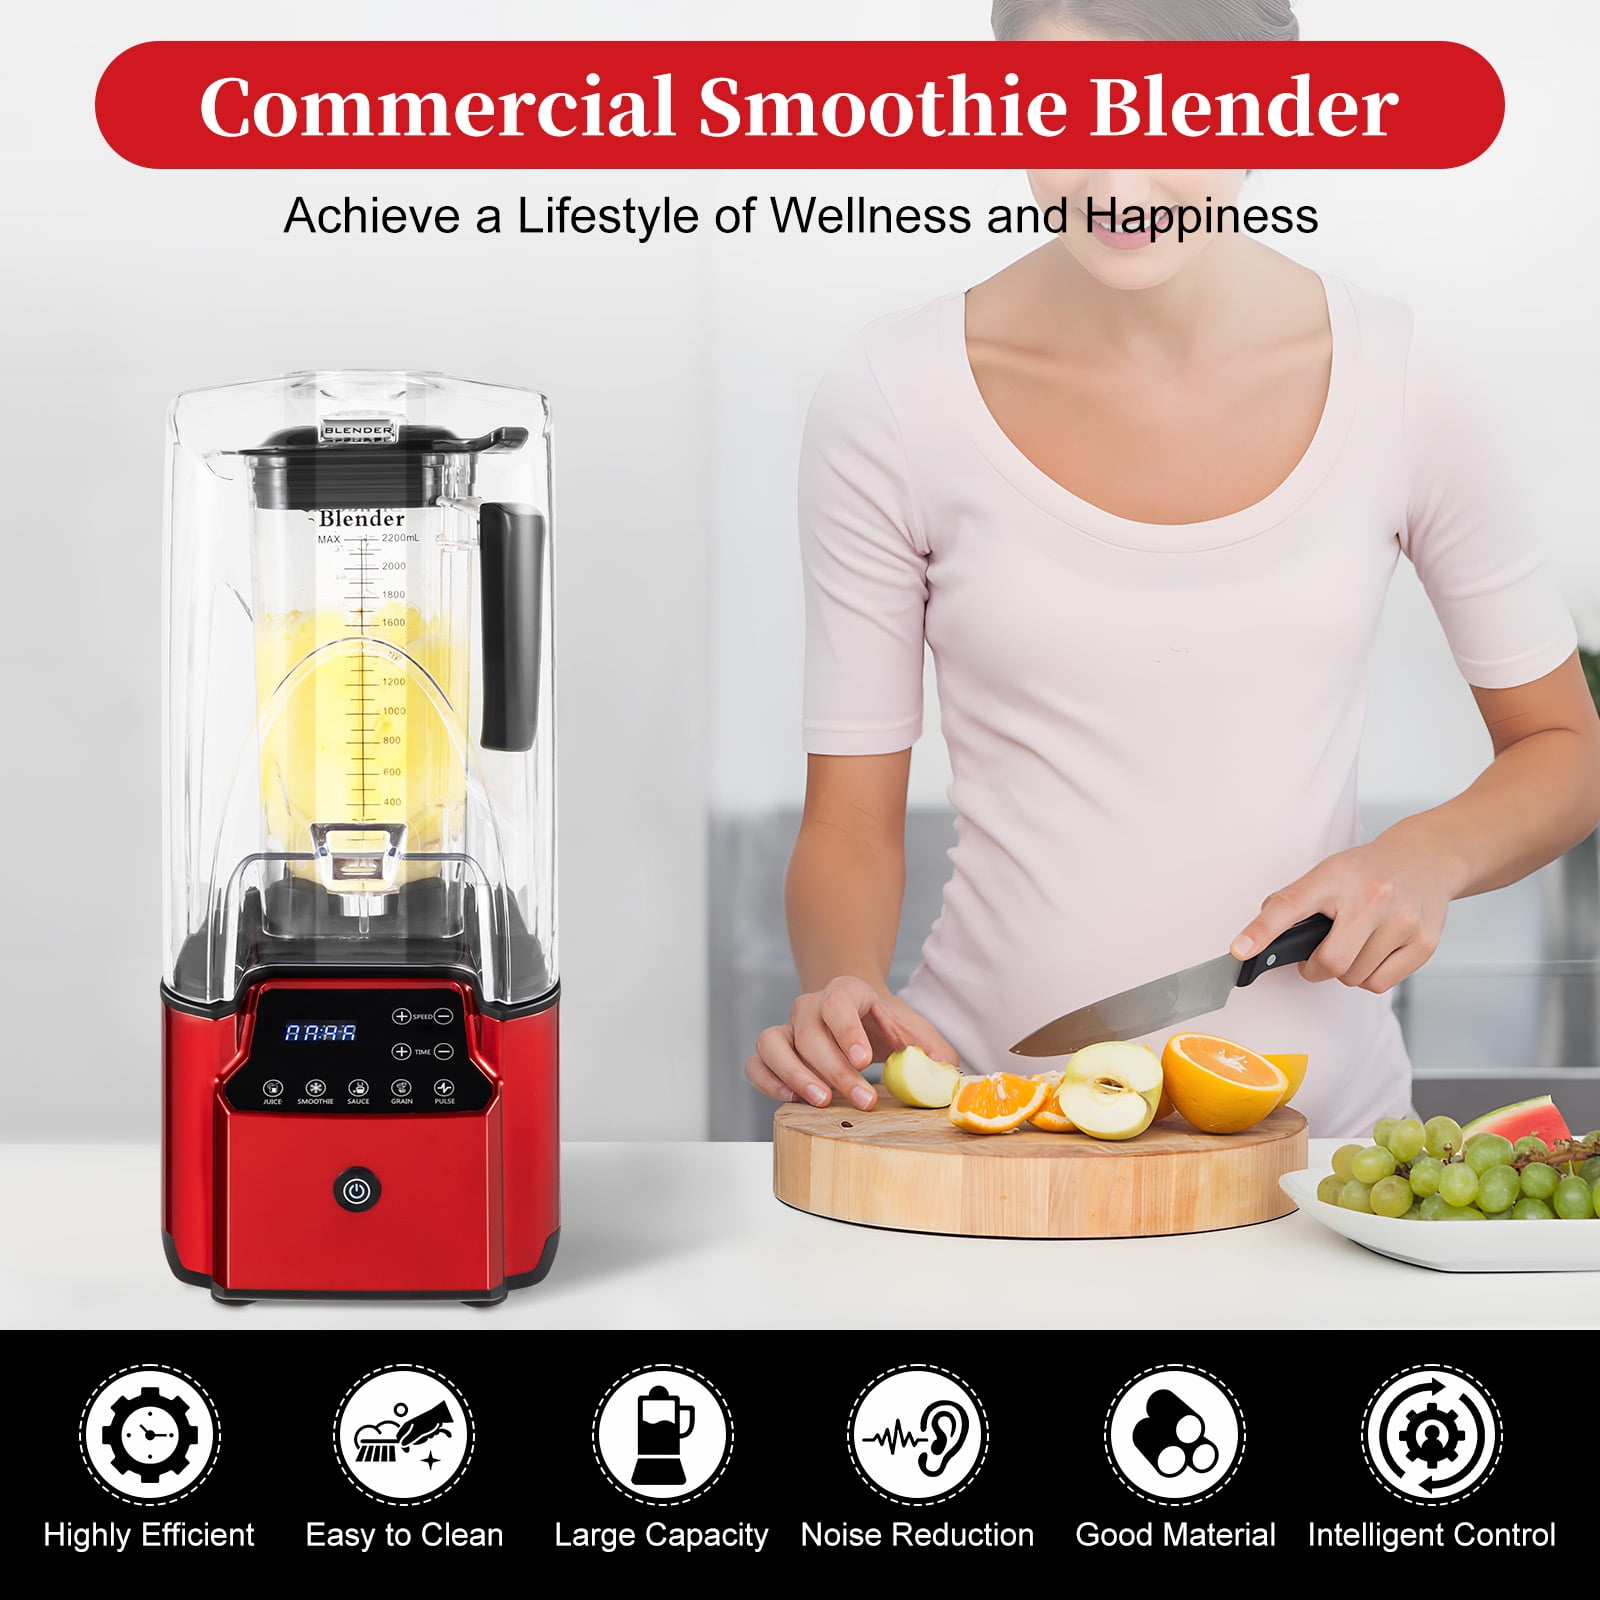  SNKOURIN Blenders for Kitchen,2200W High Speed Professional  Countertop Blender with Soundproof Housing,Commercial Quiet Blender for  Shakes and Smoothies,Red: Home & Kitchen